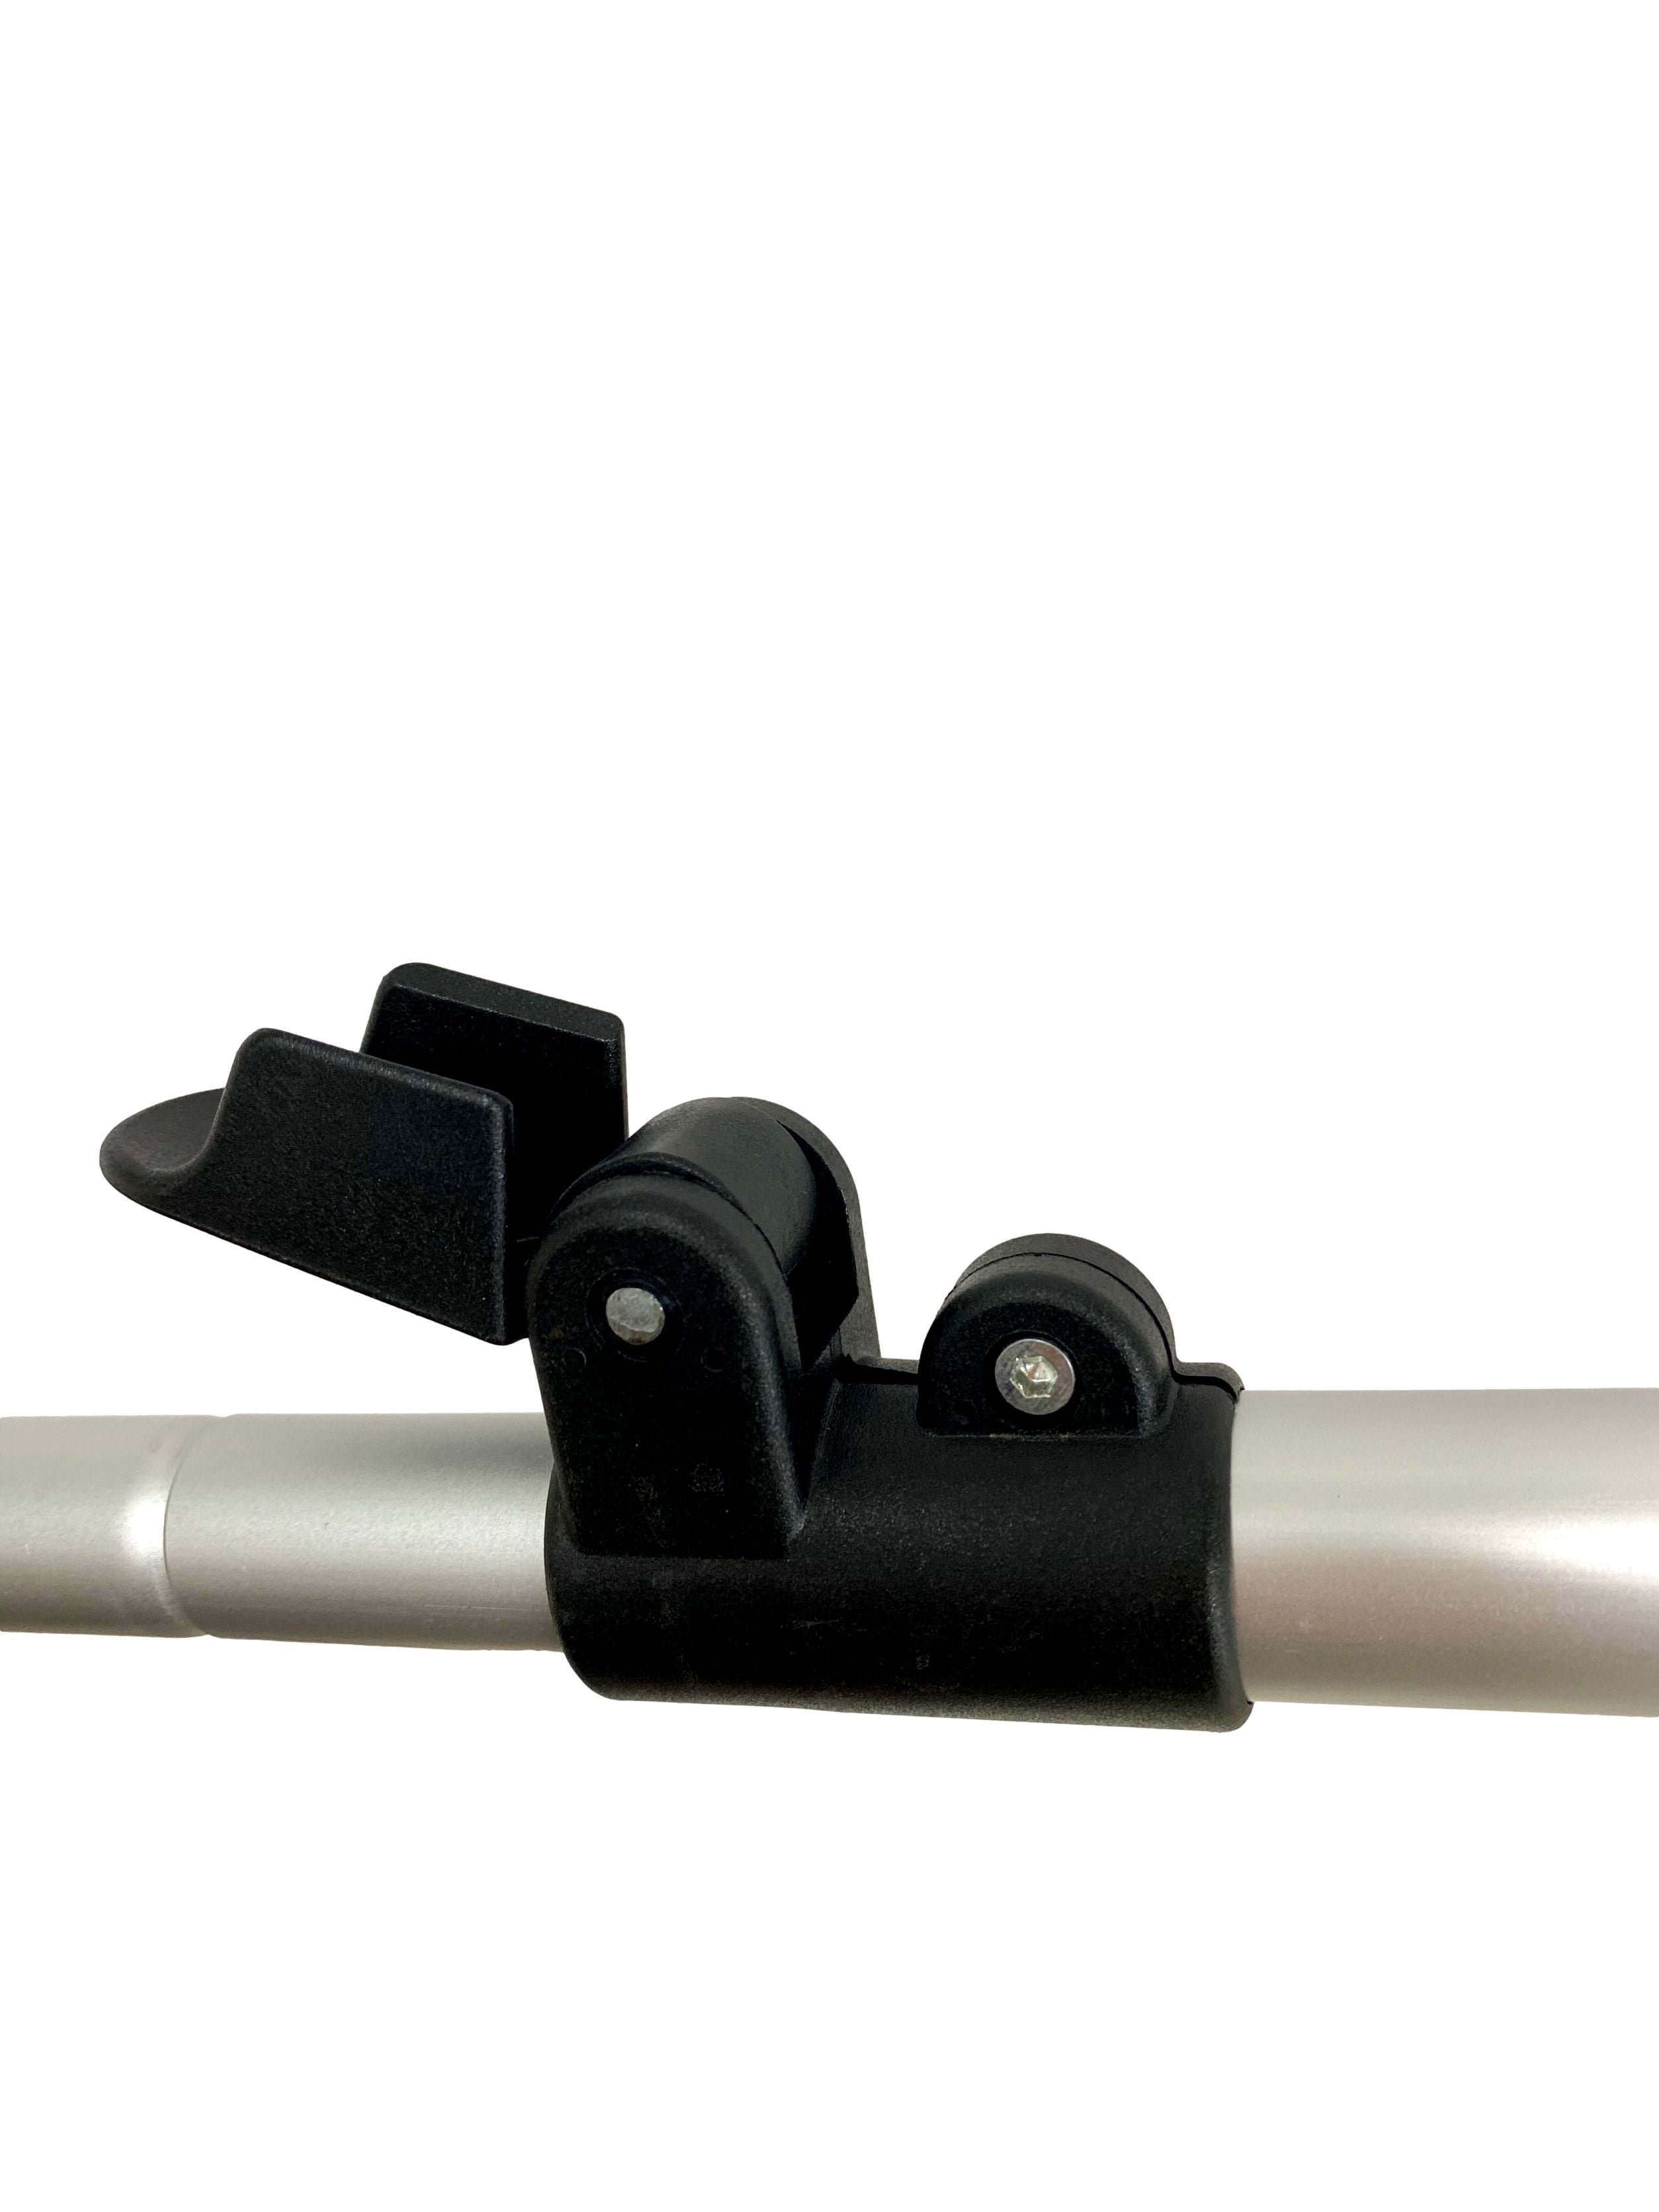 UNIVERSAL CENTRE POLE EXTENSION FOR SWAGS 185-230cm